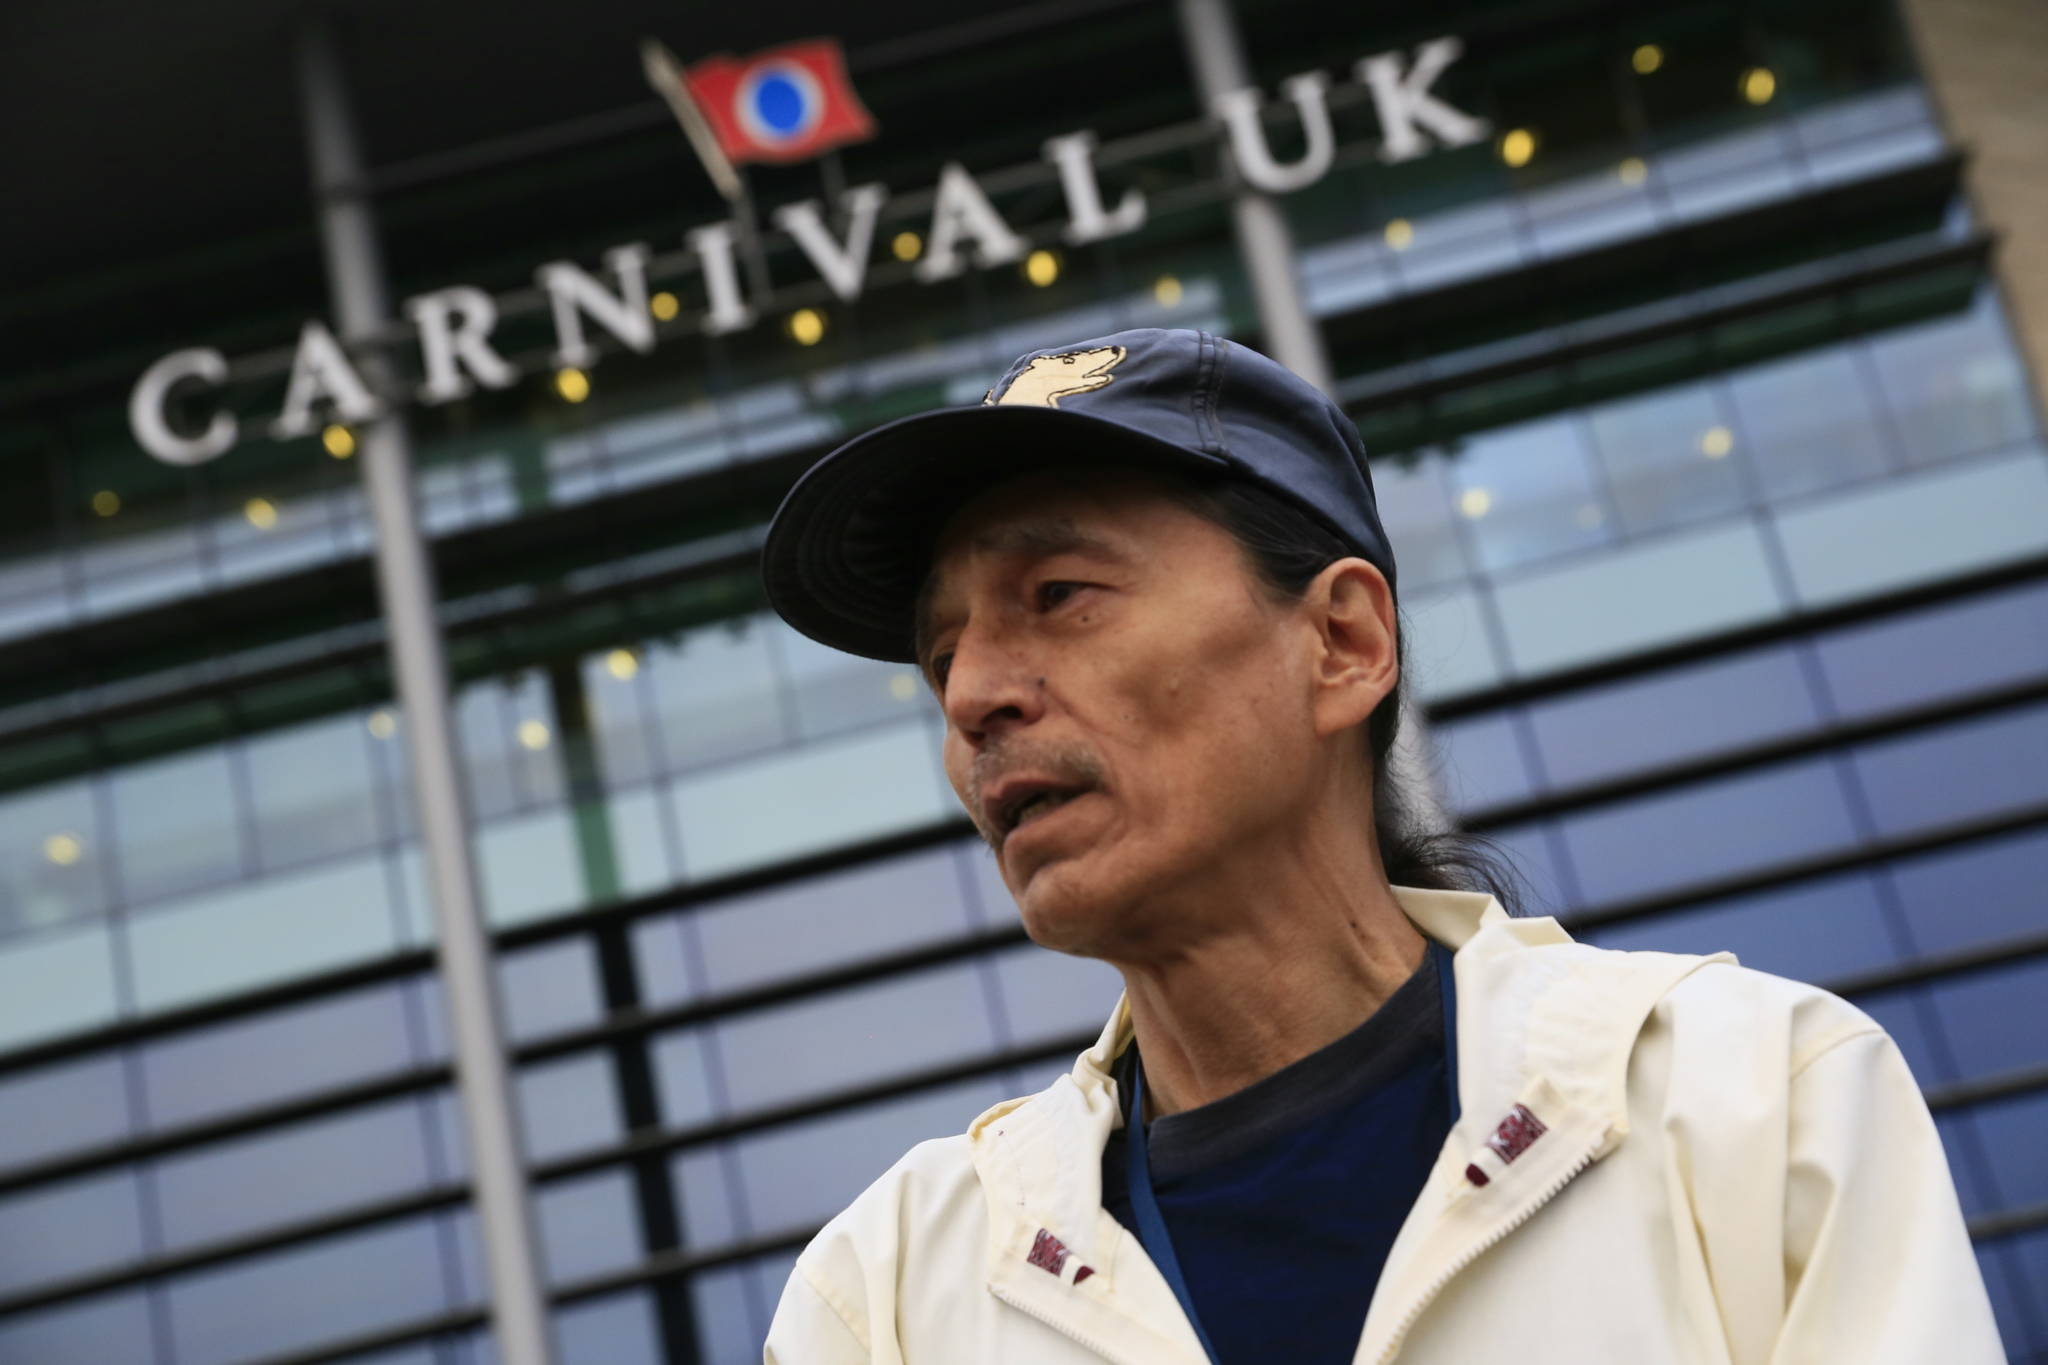 Delbert Pungowiyi, Alaska, President of Native Village of Savoonga (on St. Lawrence Island near the Bering Strait) stands in front of the UK HQ of cruise industry giant Carnival Corporation. (Courtesy Photo | Jiri Rezac via Stand.earth)